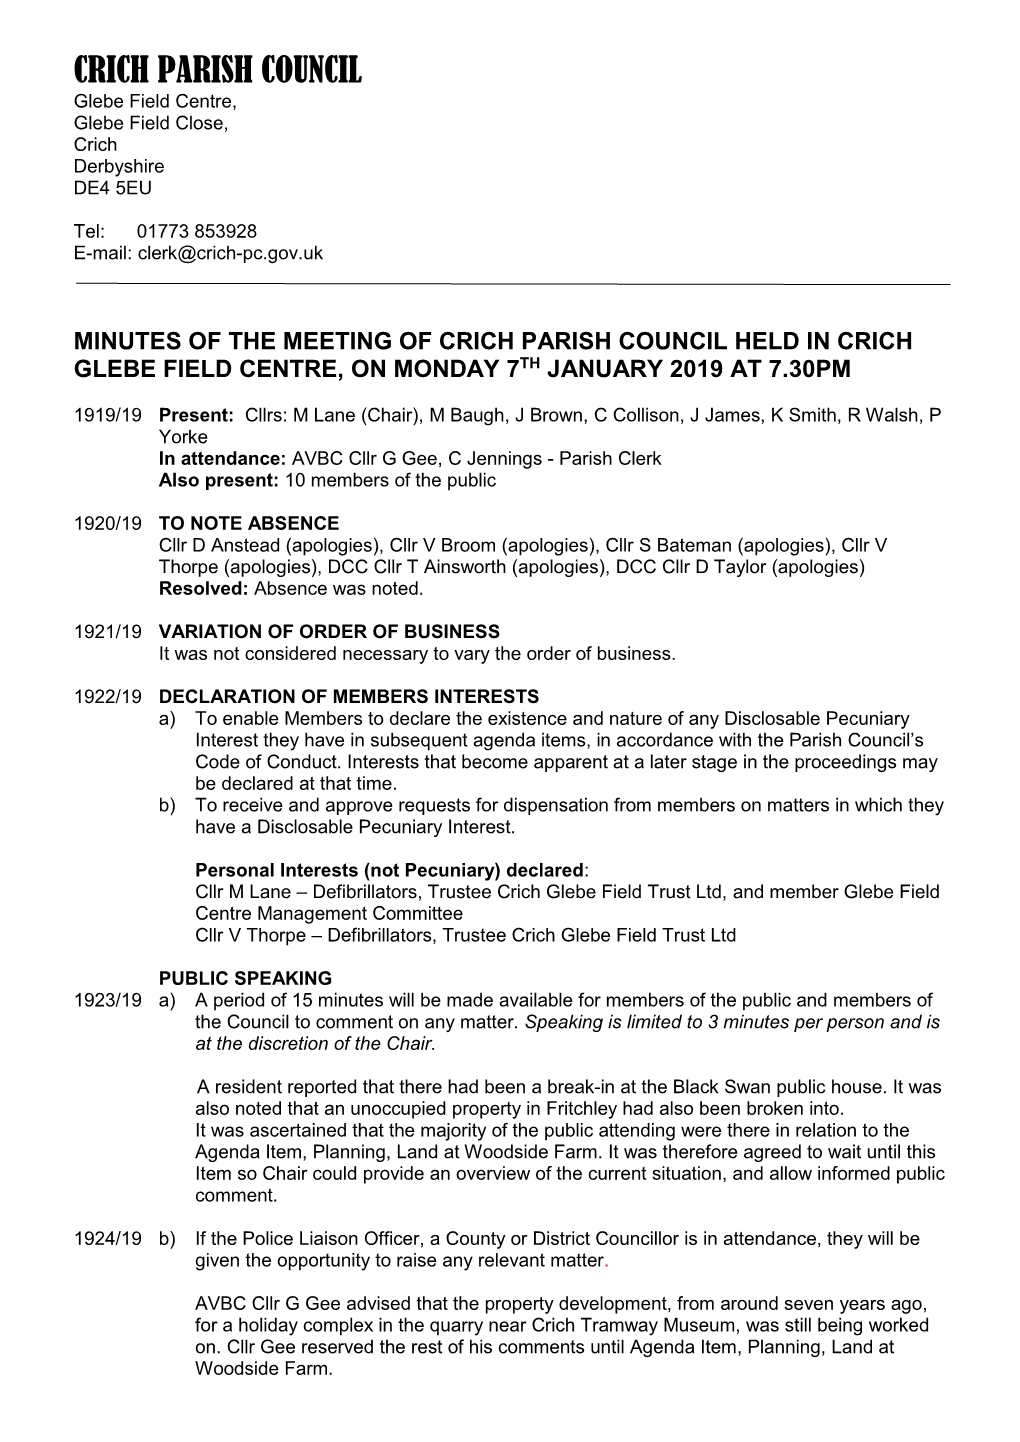 Minutes, Council, 7 January 2019